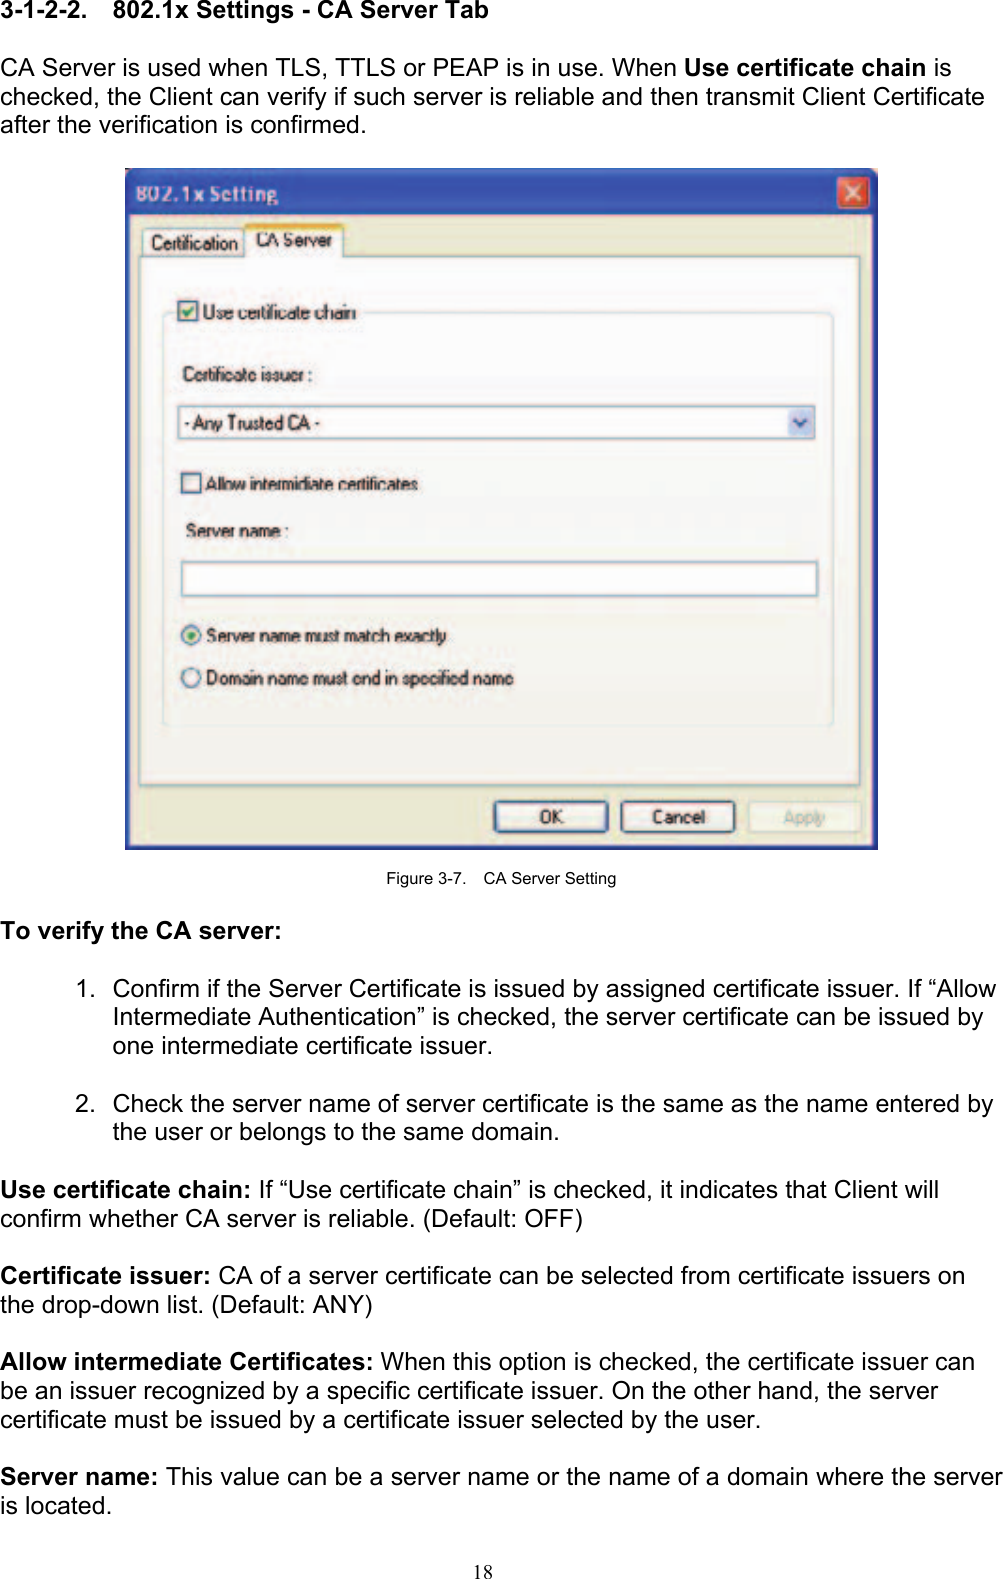 18   3-1-2-2. 802.1x Settings - CA Server Tab  CA Server is used when TLS, TTLS or PEAP is in use. When Use certificate chain is checked, the Client can verify if such server is reliable and then transmit Client Certificate after the verification is confirmed.      Figure 3-7.    CA Server Setting  To verify the CA server:  1.  Confirm if the Server Certificate is issued by assigned certificate issuer. If “Allow Intermediate Authentication” is checked, the server certificate can be issued by one intermediate certificate issuer.  2.  Check the server name of server certificate is the same as the name entered by the user or belongs to the same domain.  Use certificate chain: If “Use certificate chain” is checked, it indicates that Client will confirm whether CA server is reliable. (Default: OFF)  Certificate issuer: CA of a server certificate can be selected from certificate issuers on the drop-down list. (Default: ANY)  Allow intermediate Certificates: When this option is checked, the certificate issuer can be an issuer recognized by a specific certificate issuer. On the other hand, the server certificate must be issued by a certificate issuer selected by the user.  Server name: This value can be a server name or the name of a domain where the server is located. 